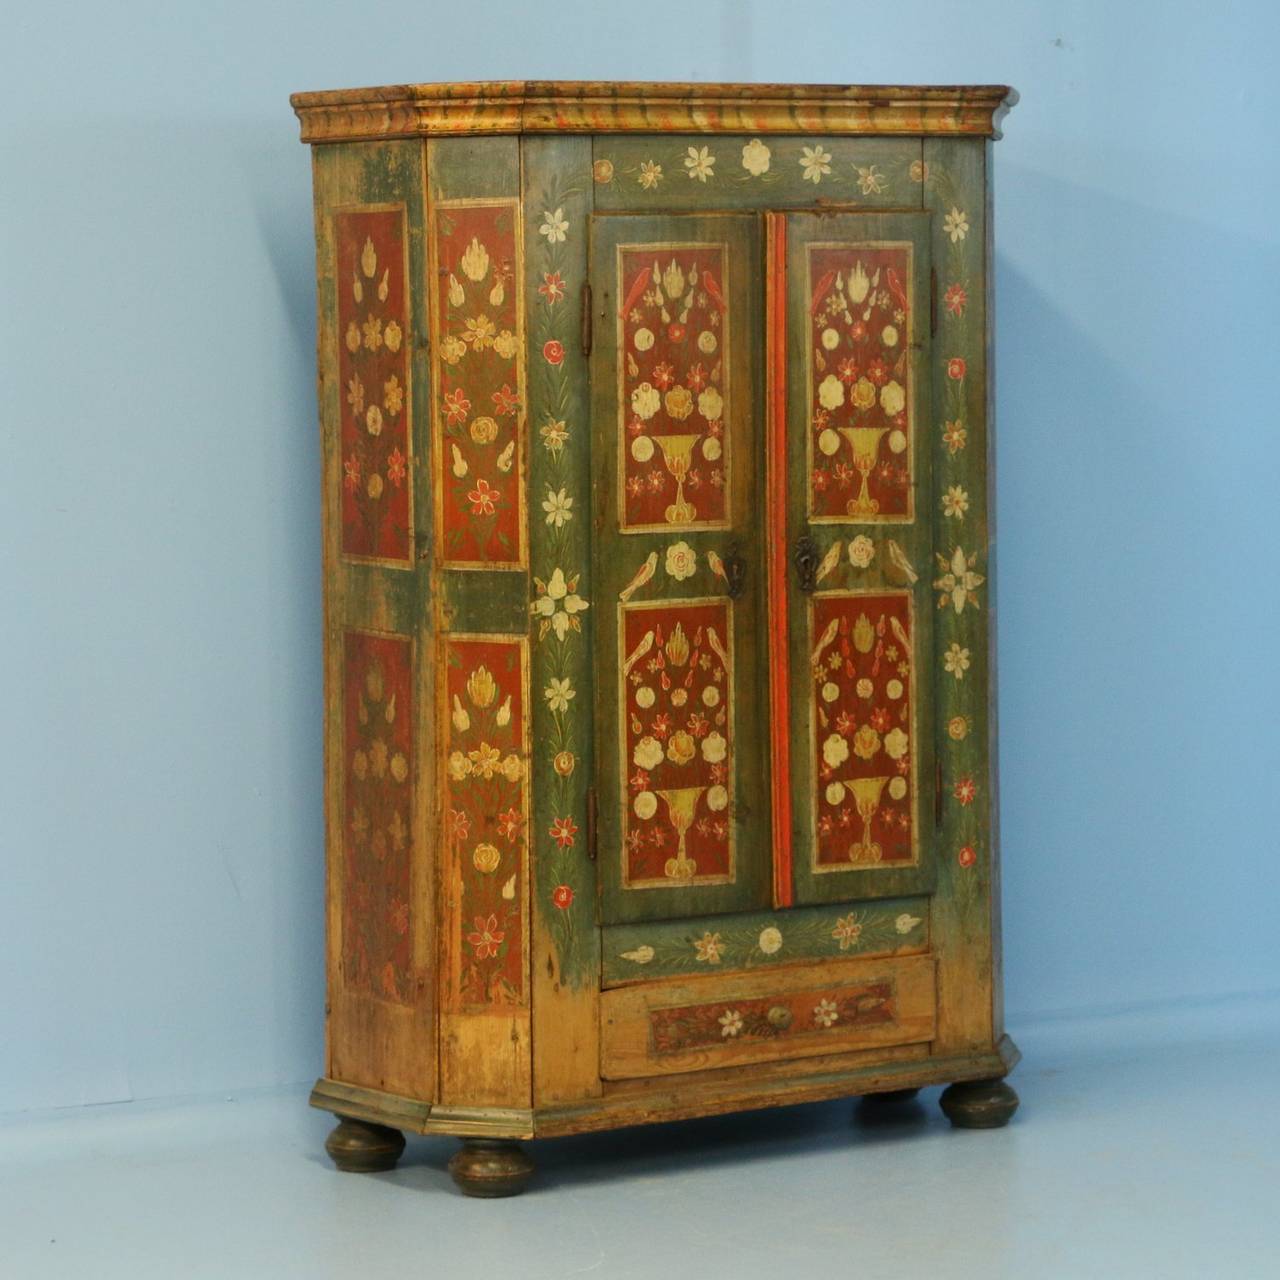 This is a truly outstanding painted armoire due to the high quality and detail of the original paint.  The soft, gentle colors with delightful bird and floral motif are unusual in both detail and quality. Please examine the close up photos to